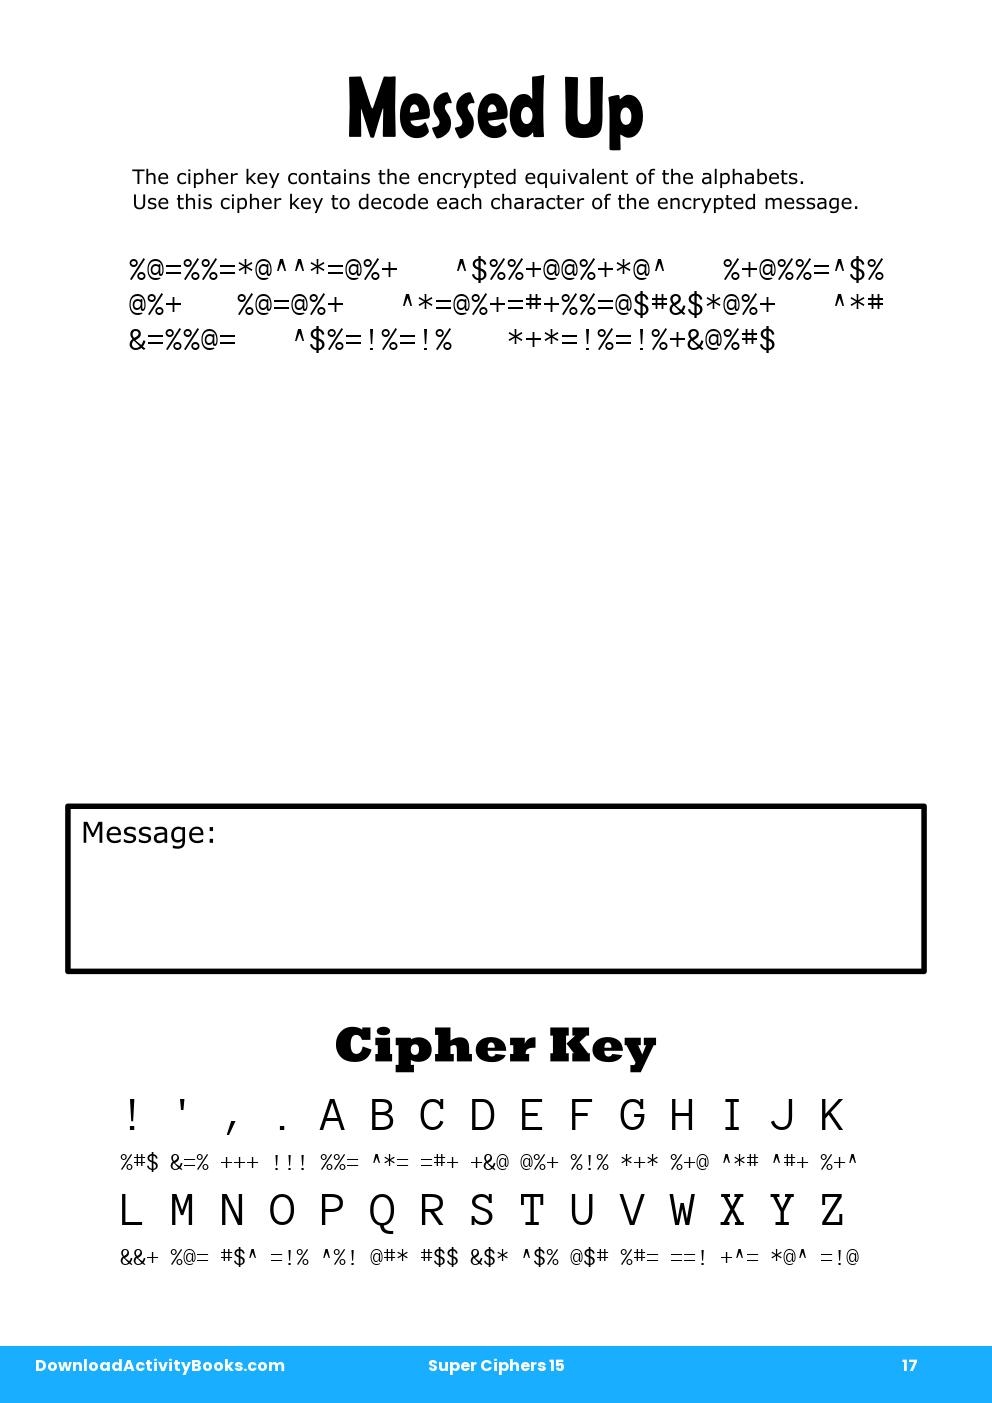 Messed Up in Super Ciphers 15